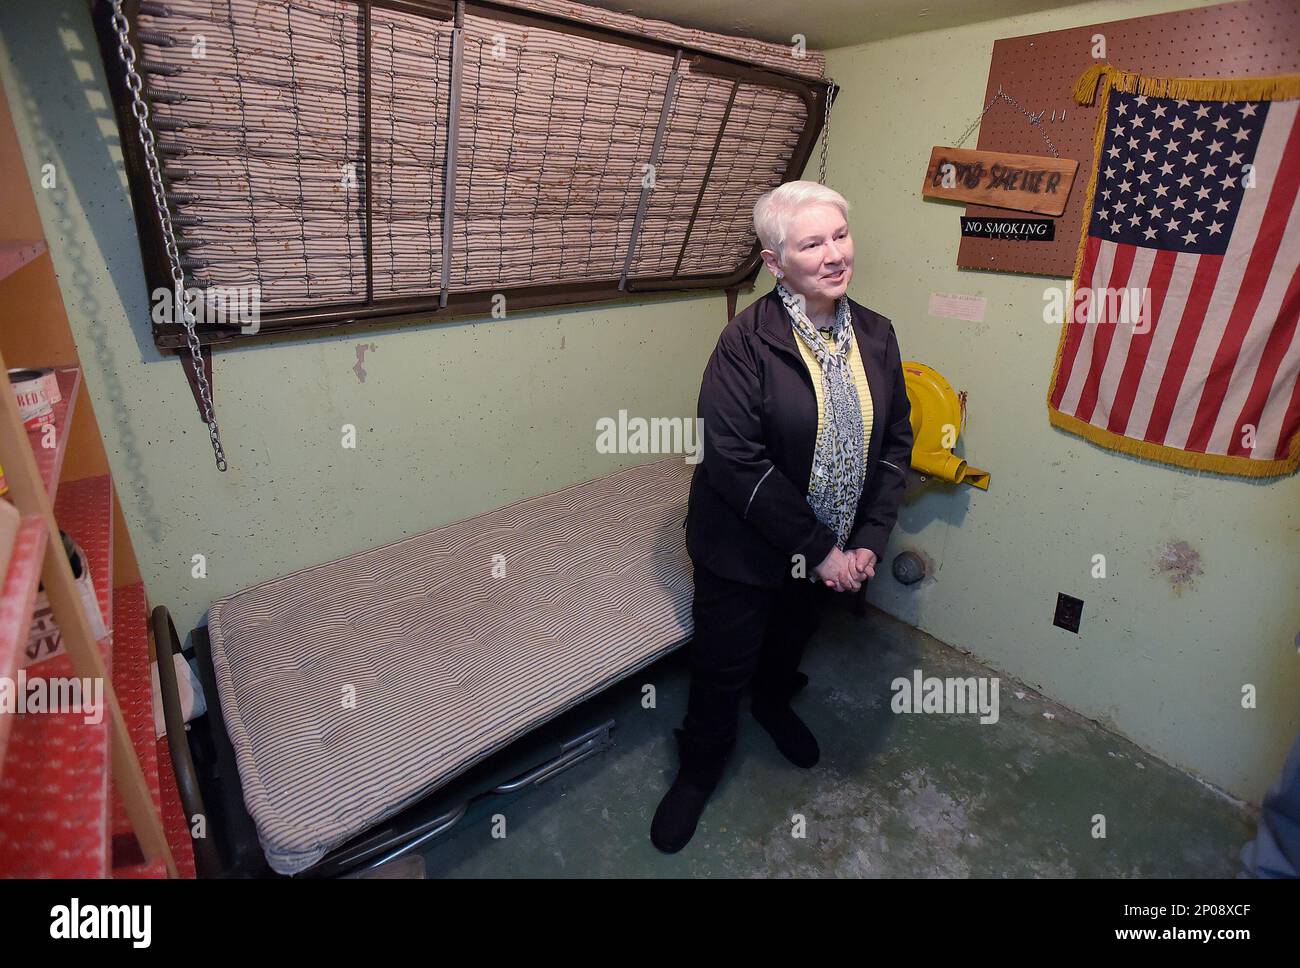 https://c8.alamy.com/comp/2P08XCF/advance-for-weekend-editions-feb-18-19-in-this-jan-31-2017-photo-marilyn-hill-stands-inside-the-fallout-shelter-in-the-backyard-of-her-albany-ore-home-the-10-foot-by-8-foot-shelter-was-designed-to-house-up-to-eight-people-the-walls-are-eight-inches-thick-the-shelter-was-built-by-a-previous-owner-in-1961-using-a-government-grant-andy-cripethe-corvallis-gazette-times-via-ap-2P08XCF.jpg